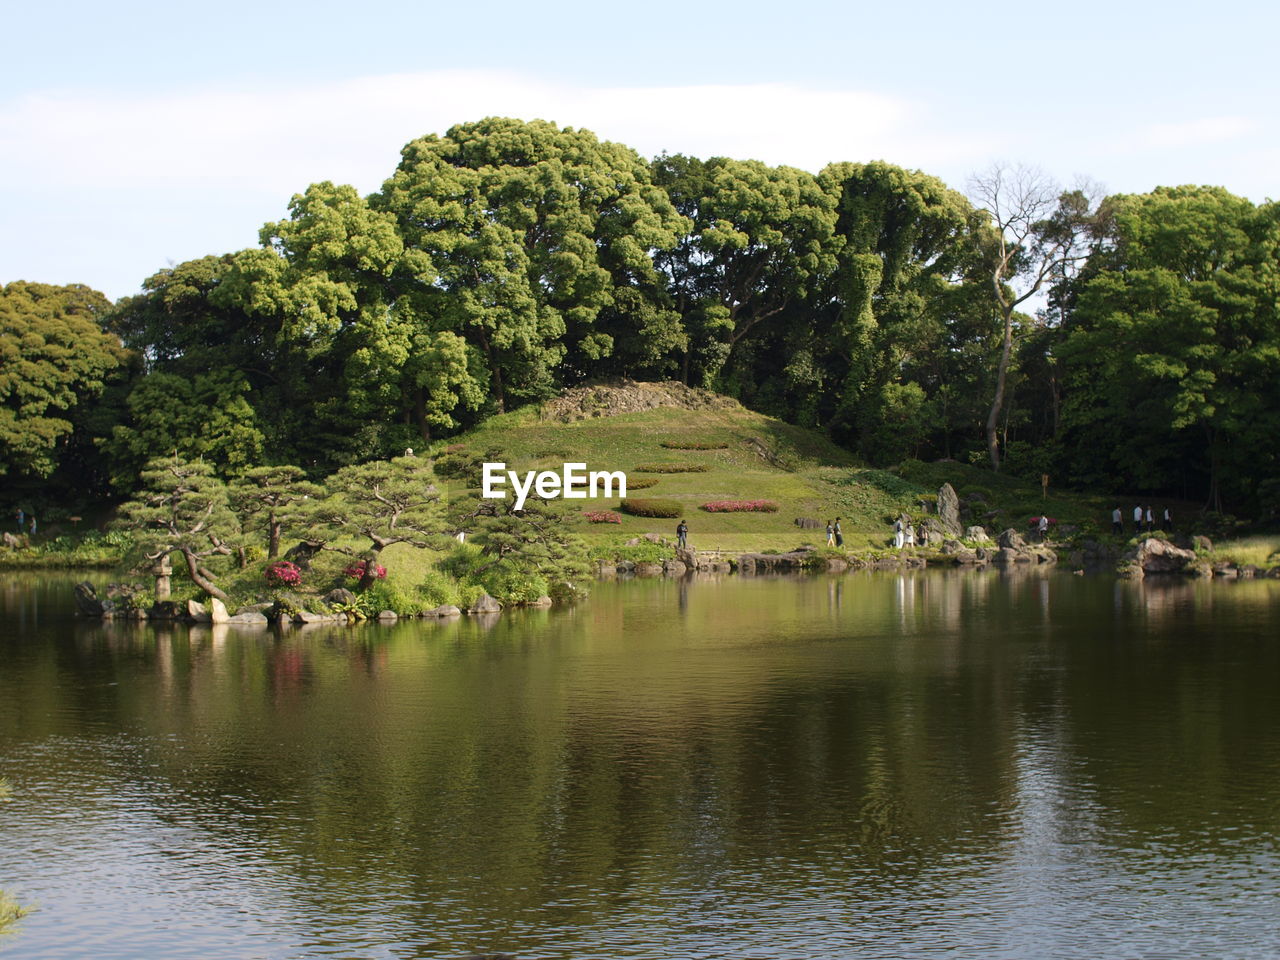 SCENIC VIEW OF LAKE WITH TREES IN BACKGROUND